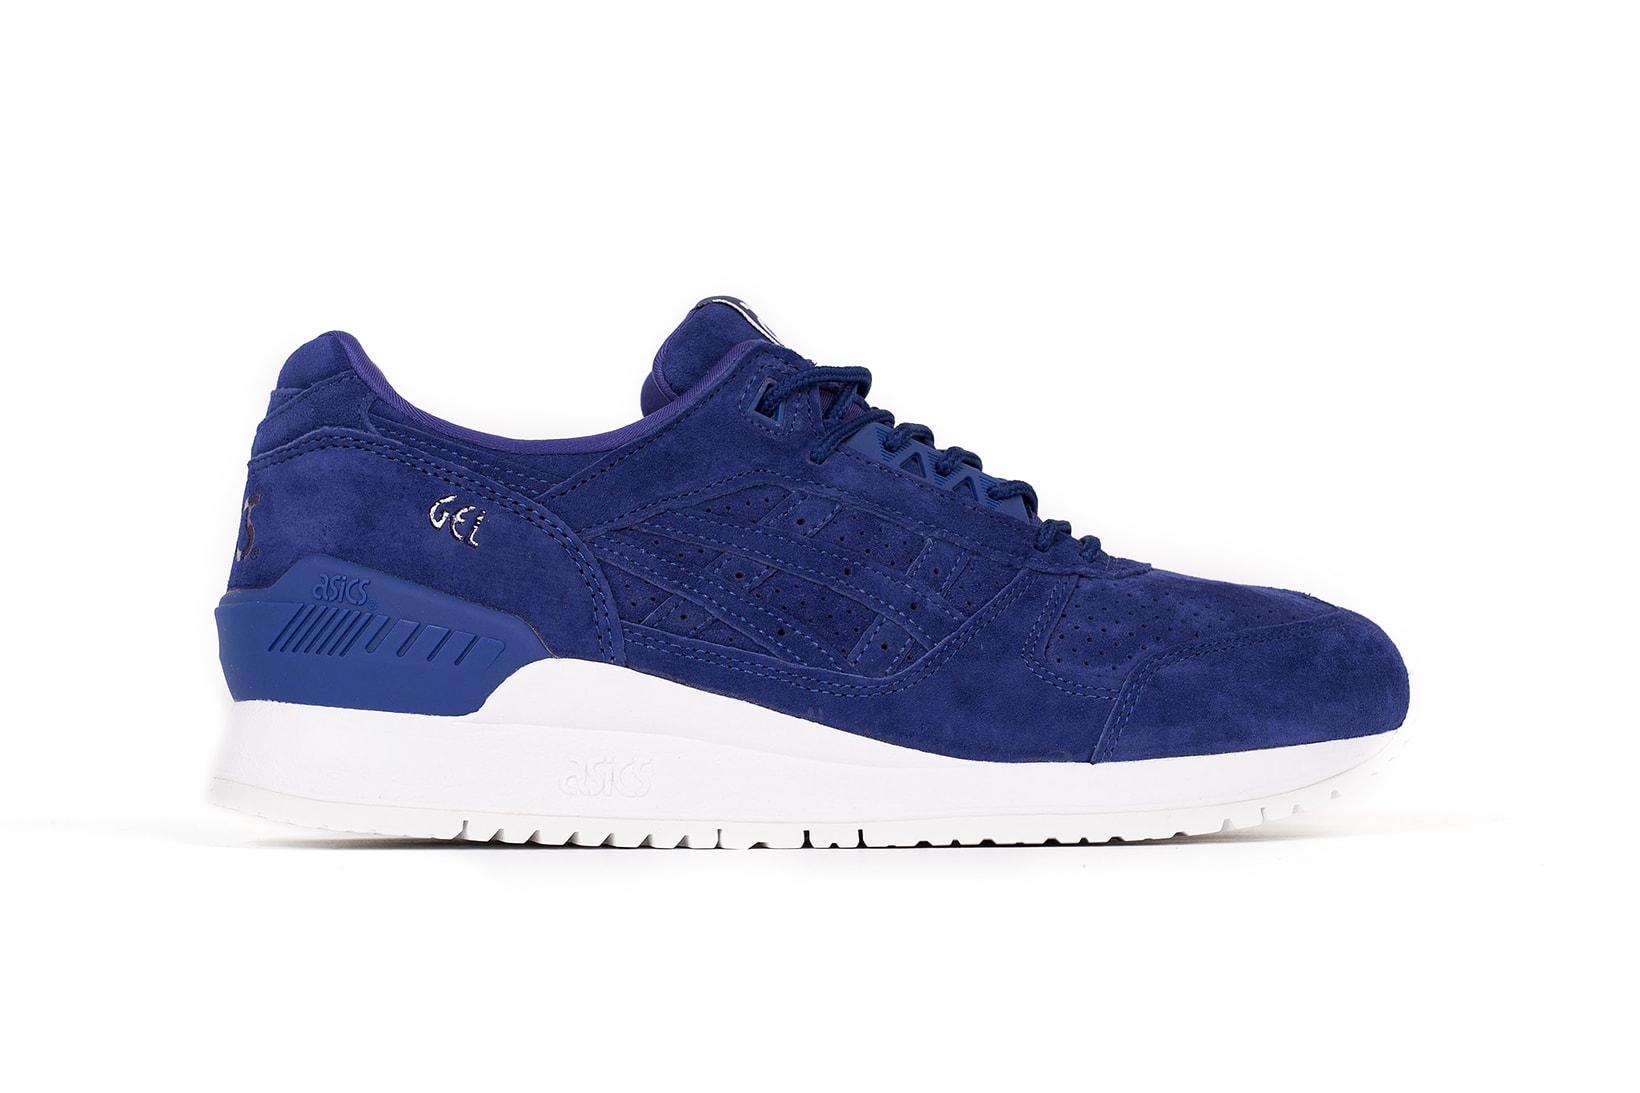 ASICS Suede Gel-Respector GT-Cool Xpress Blue And Red Colorways